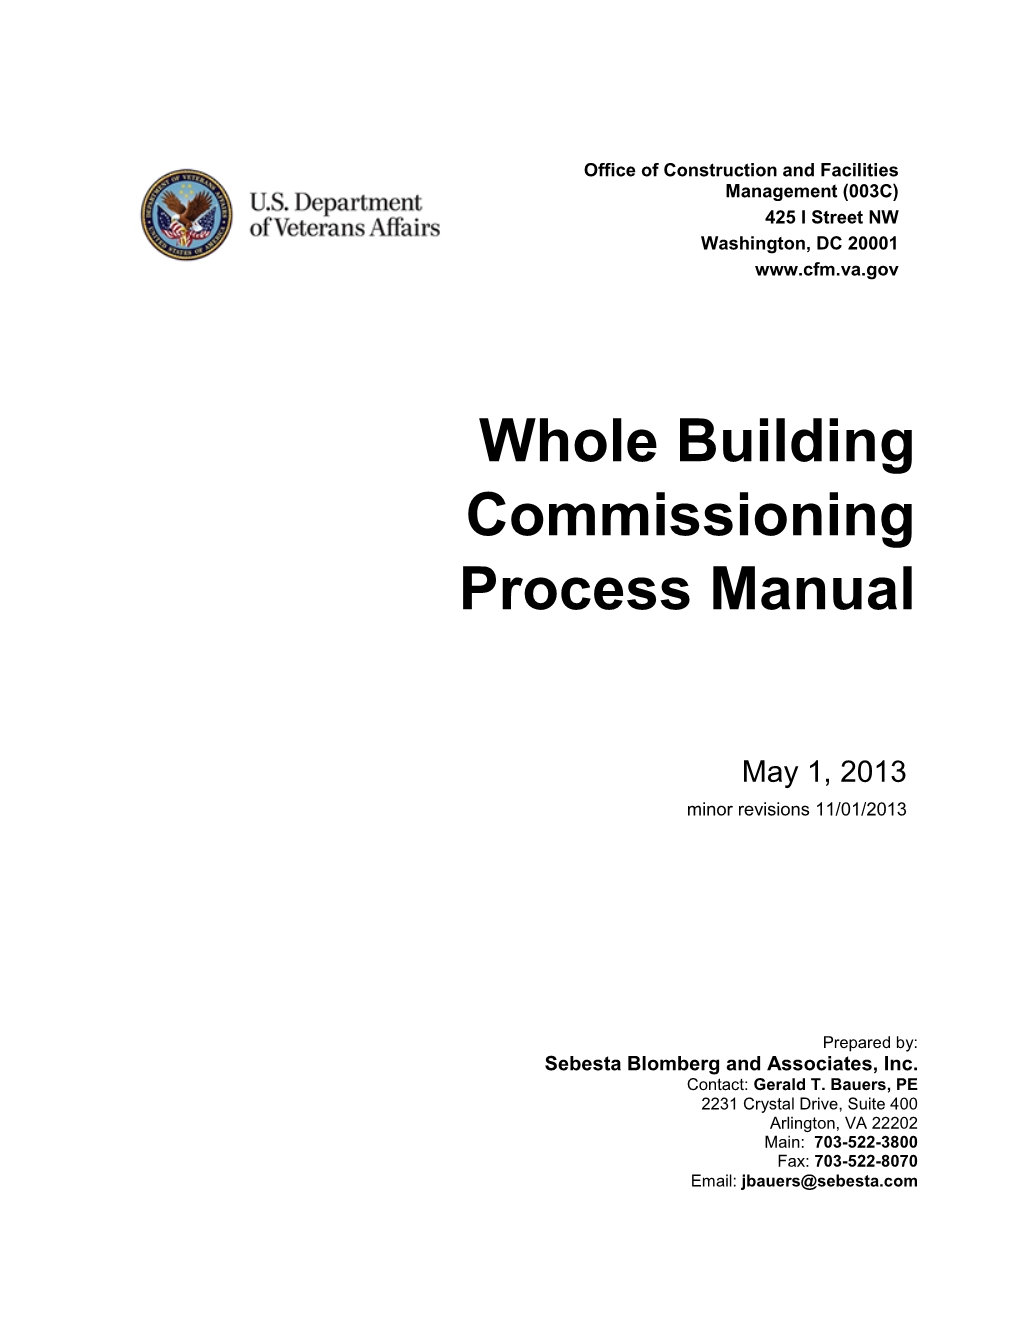 Whole Building Commissioning Process Manual